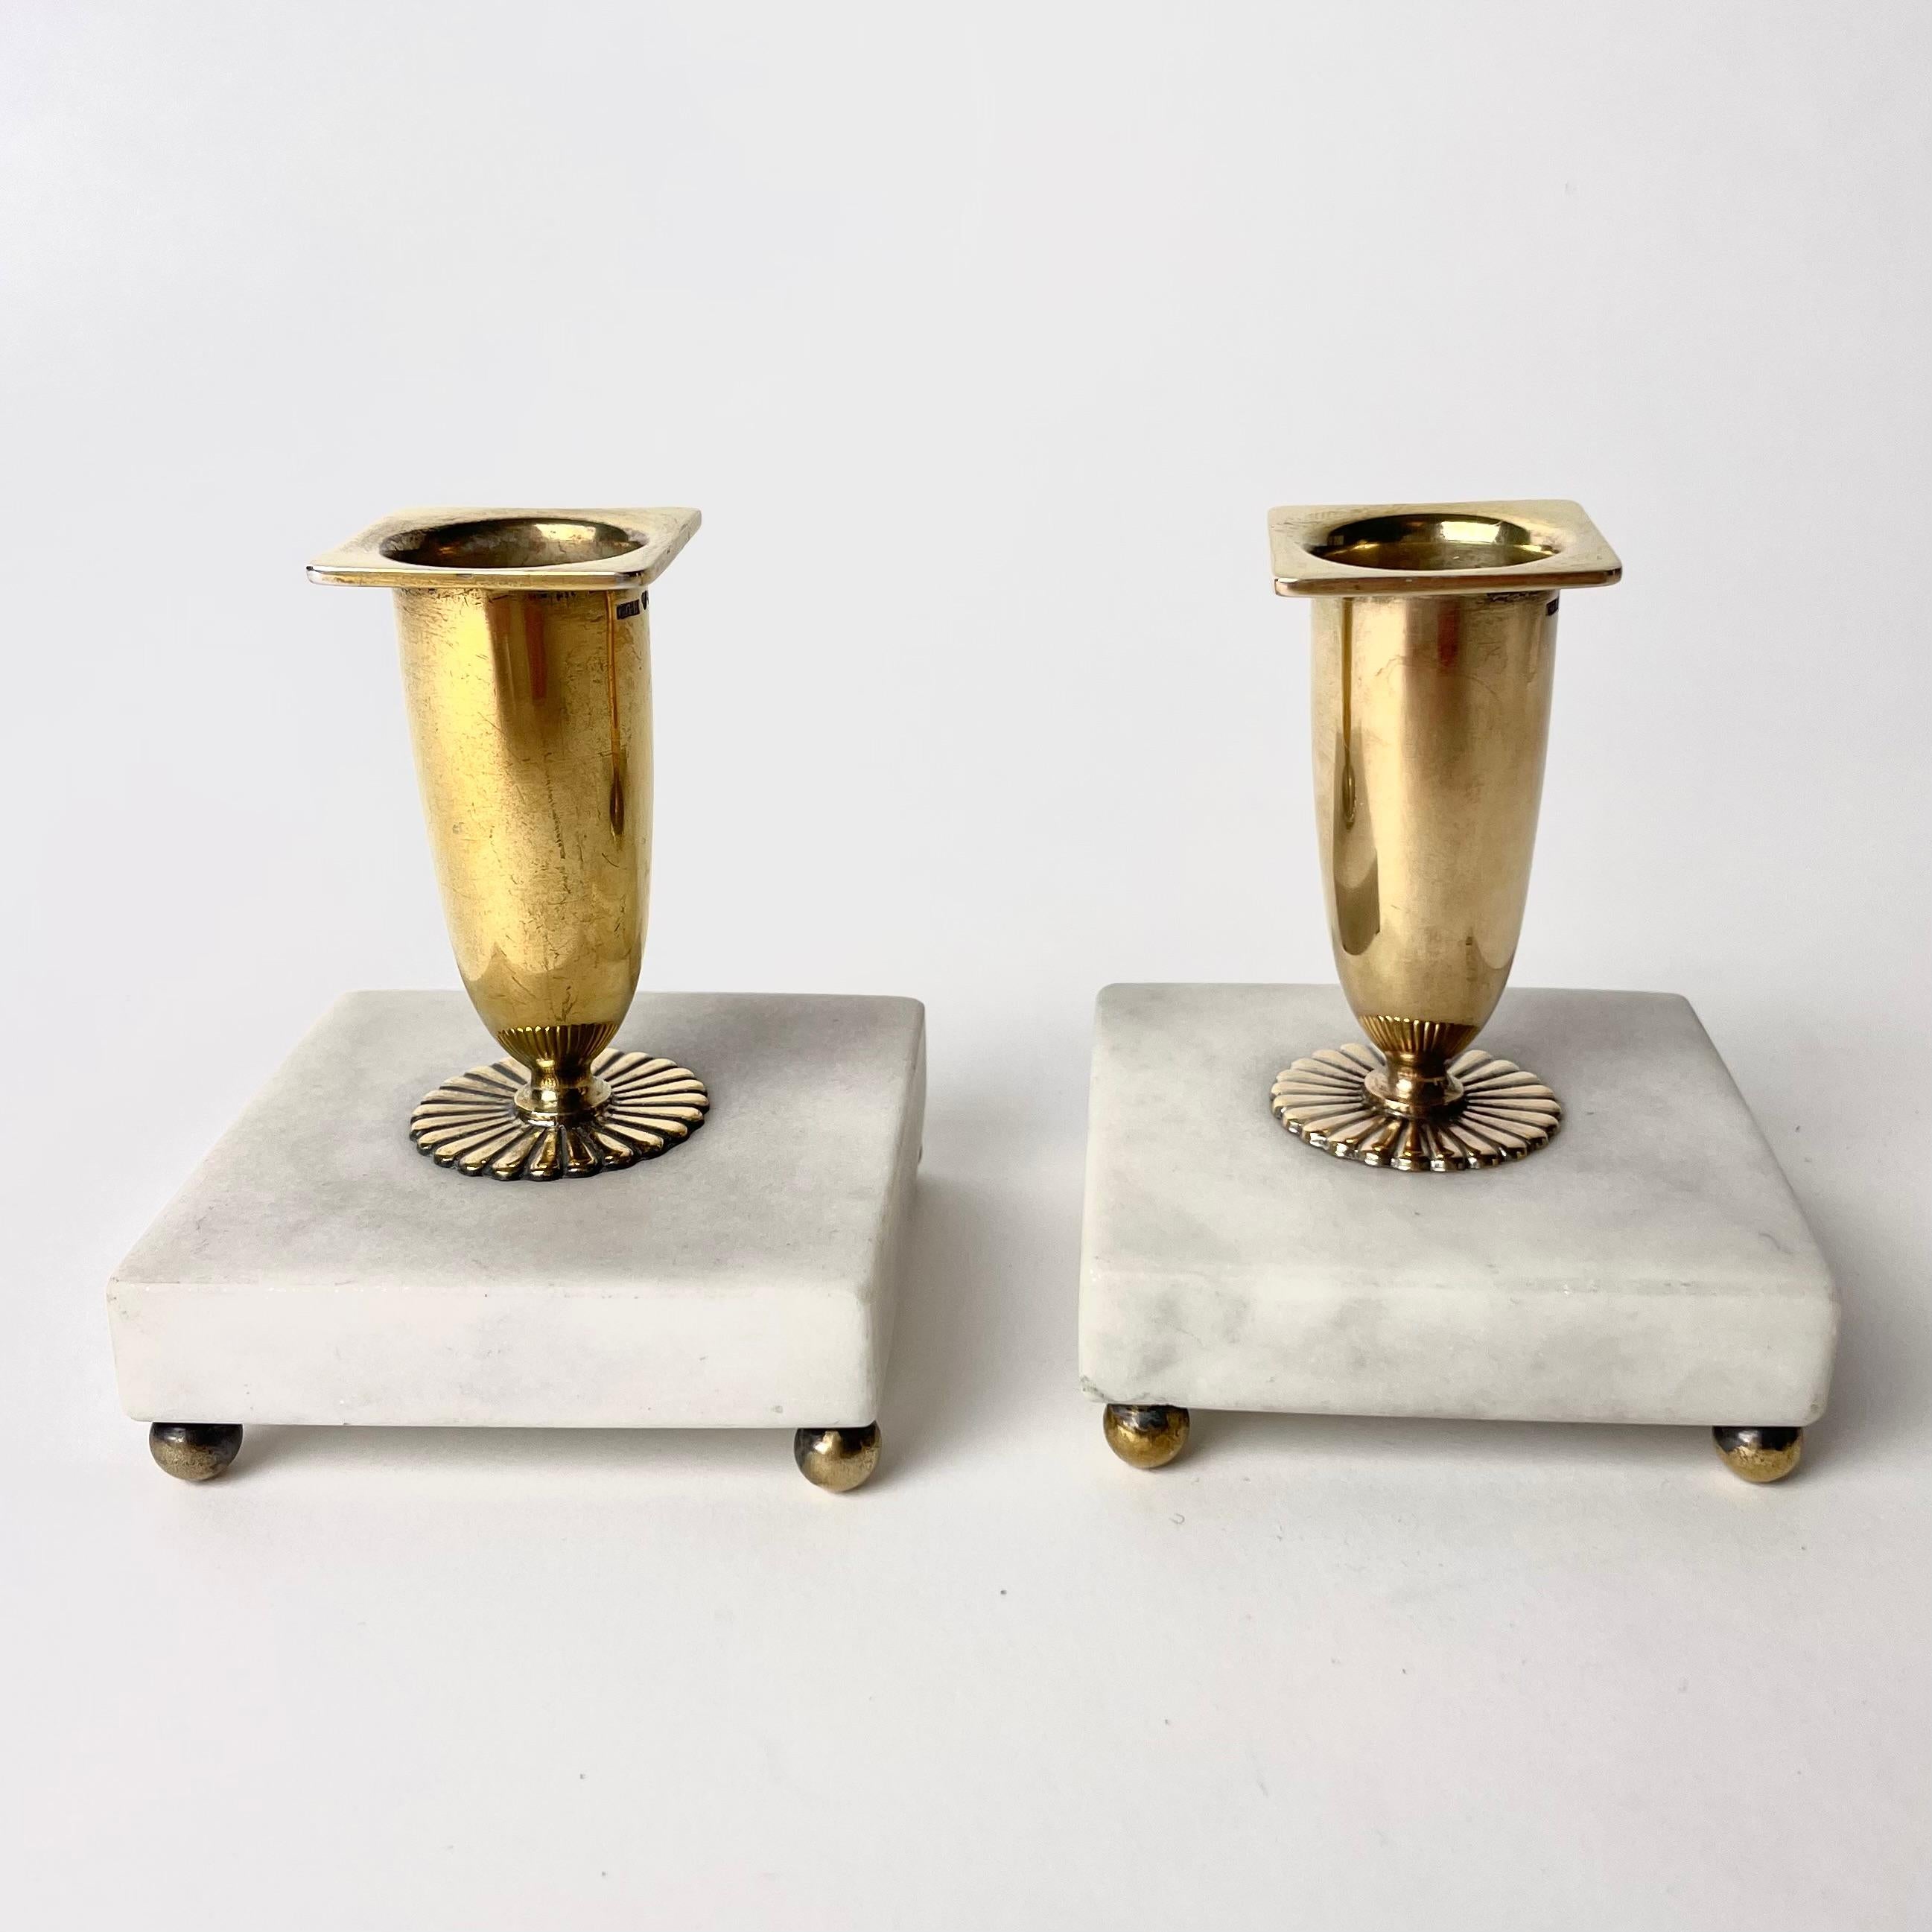 Three-piece Desk Set in gilded silver. Swedish Grace from CG Hallbergs from 1929 For Sale 5